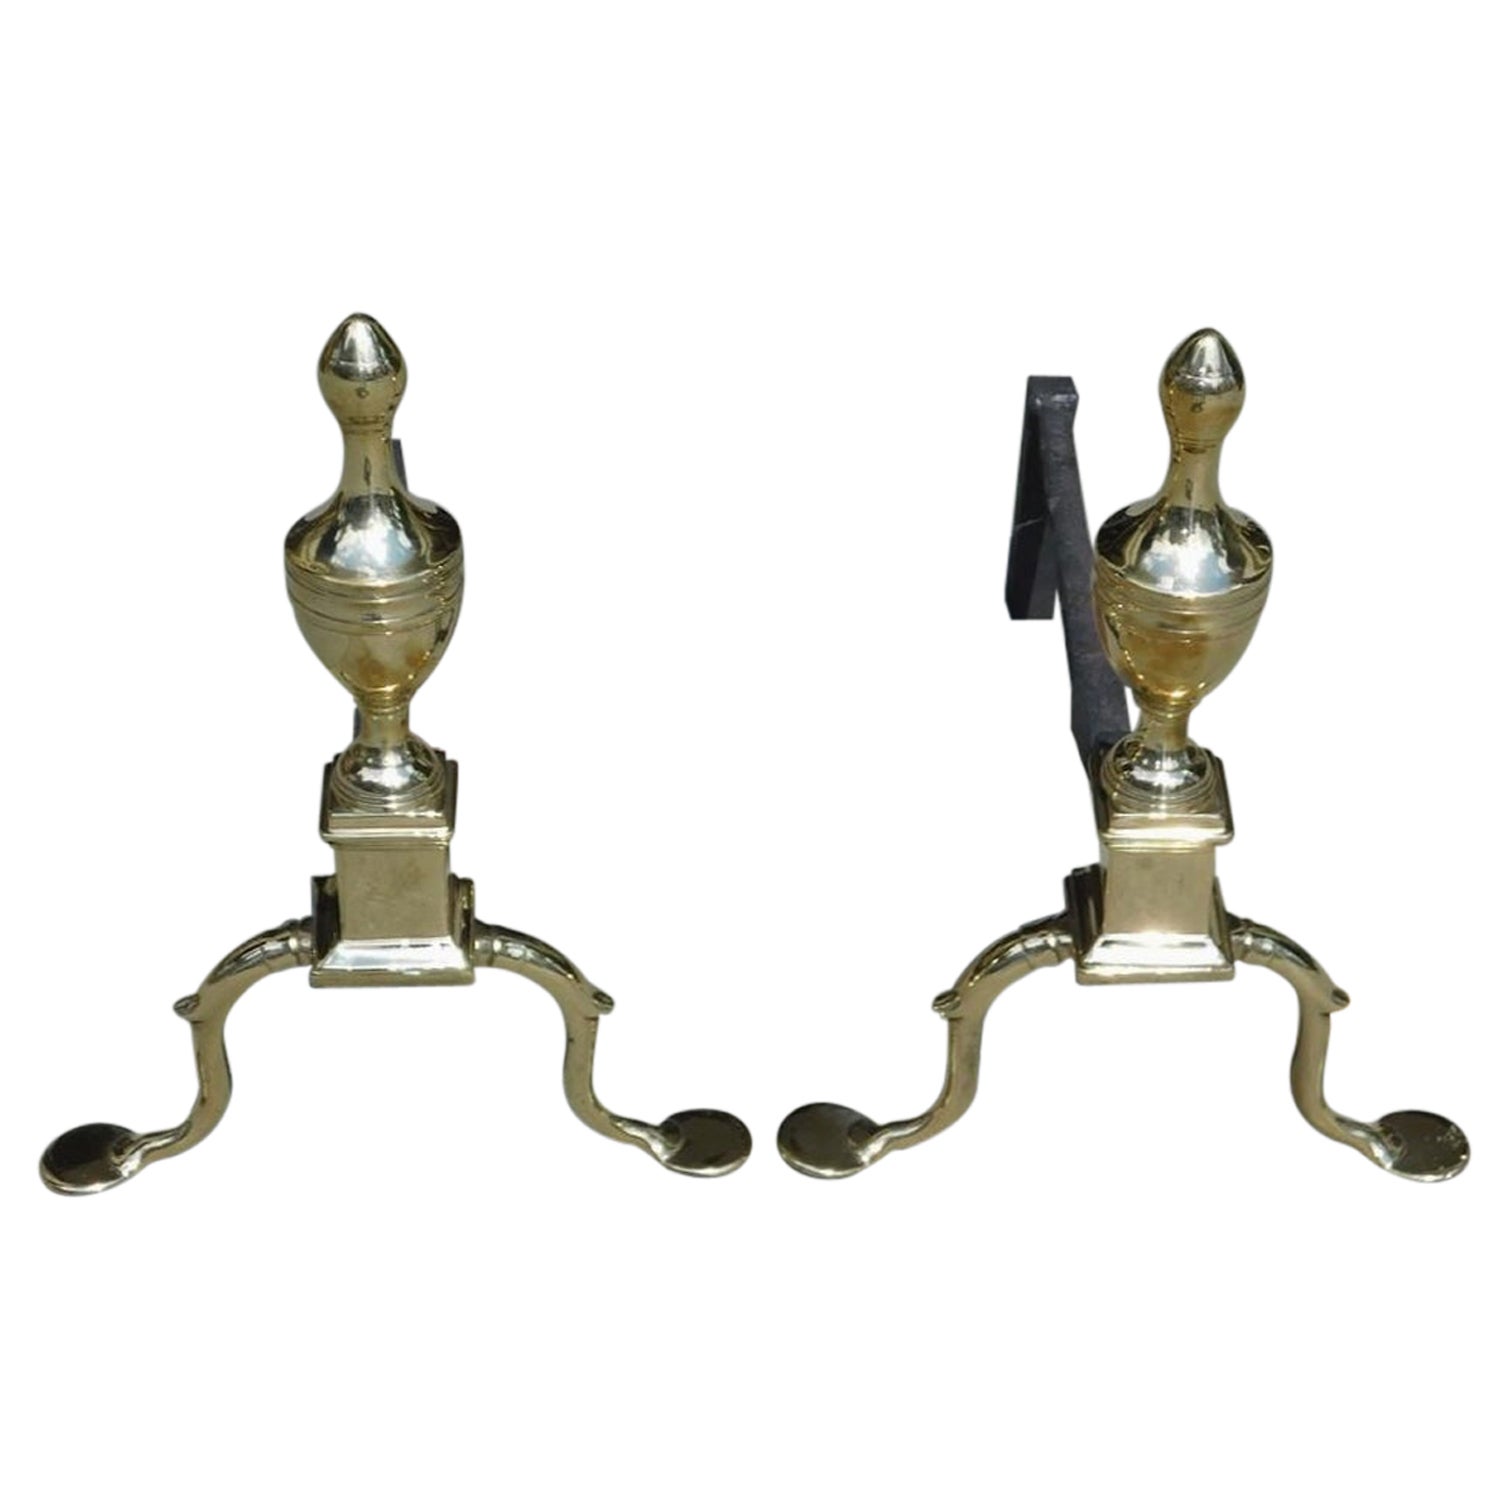 Pair of American Brass Urn Finial Andirons with Penny Feet, Philadelphia C. 1780 For Sale